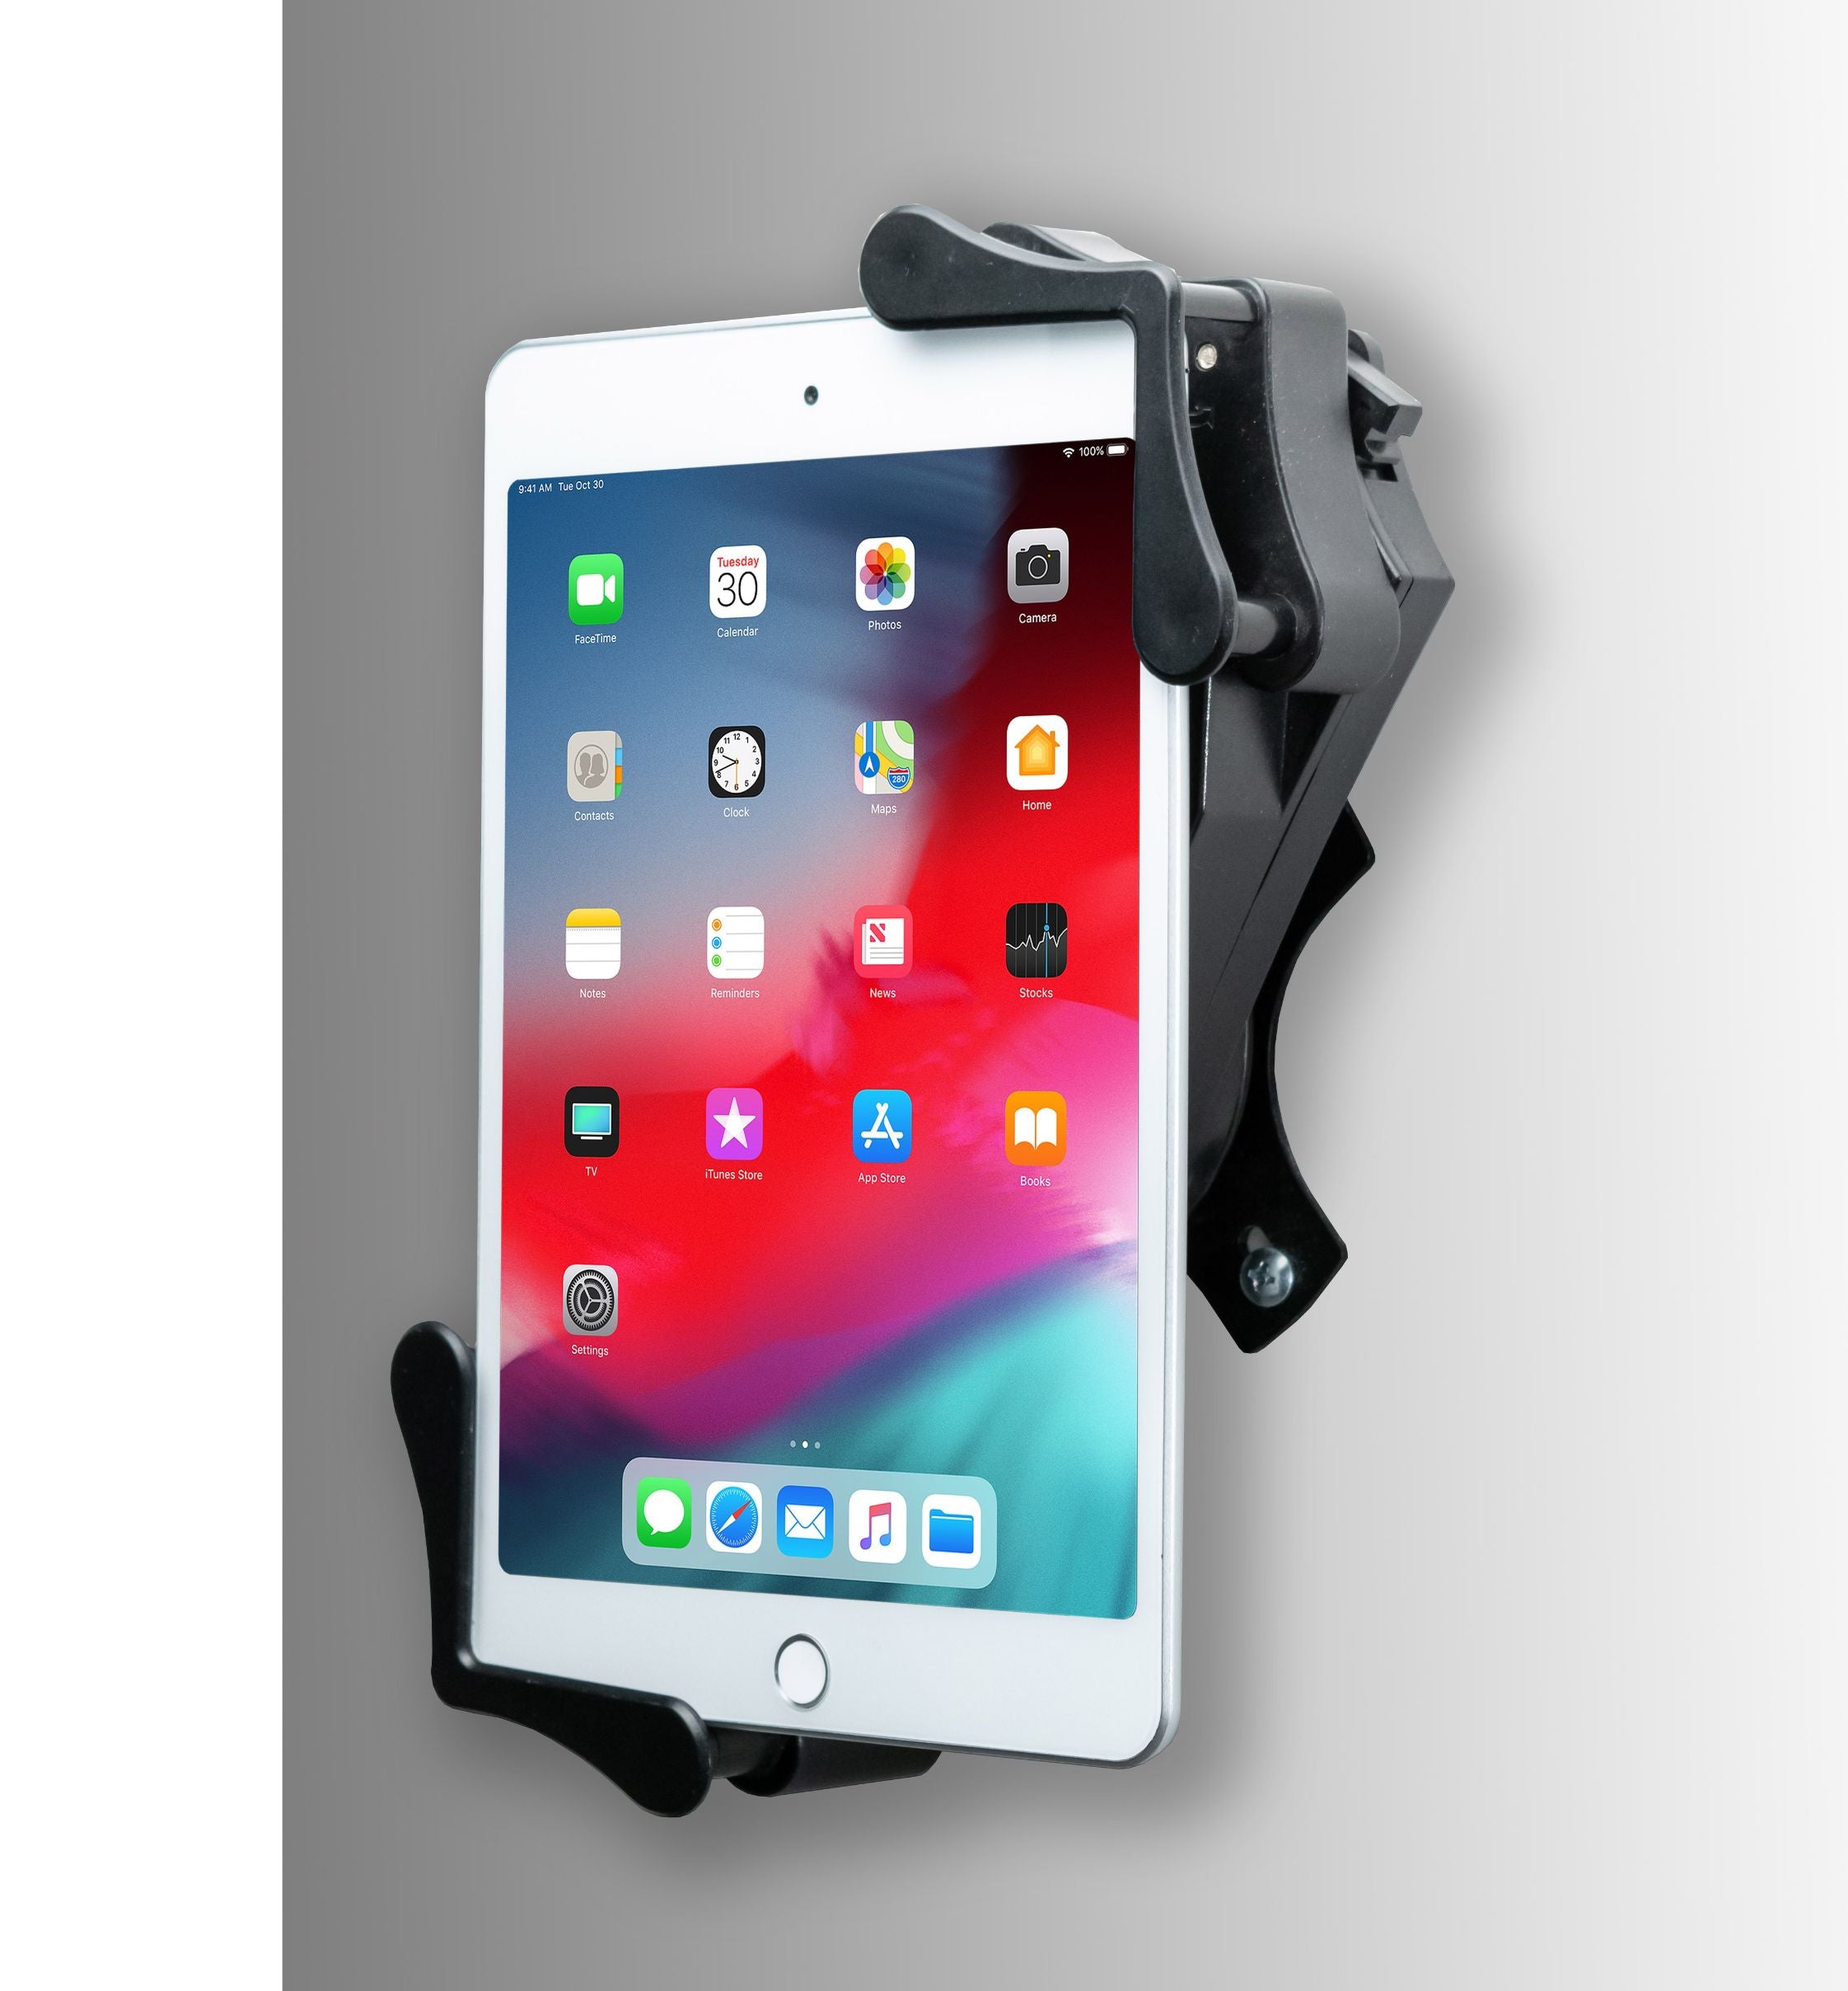 Rotating Wall Mount for 7-14 Inch Tablets, including iPad 10.2-inch (7th/ 8th/ 9th Generation)